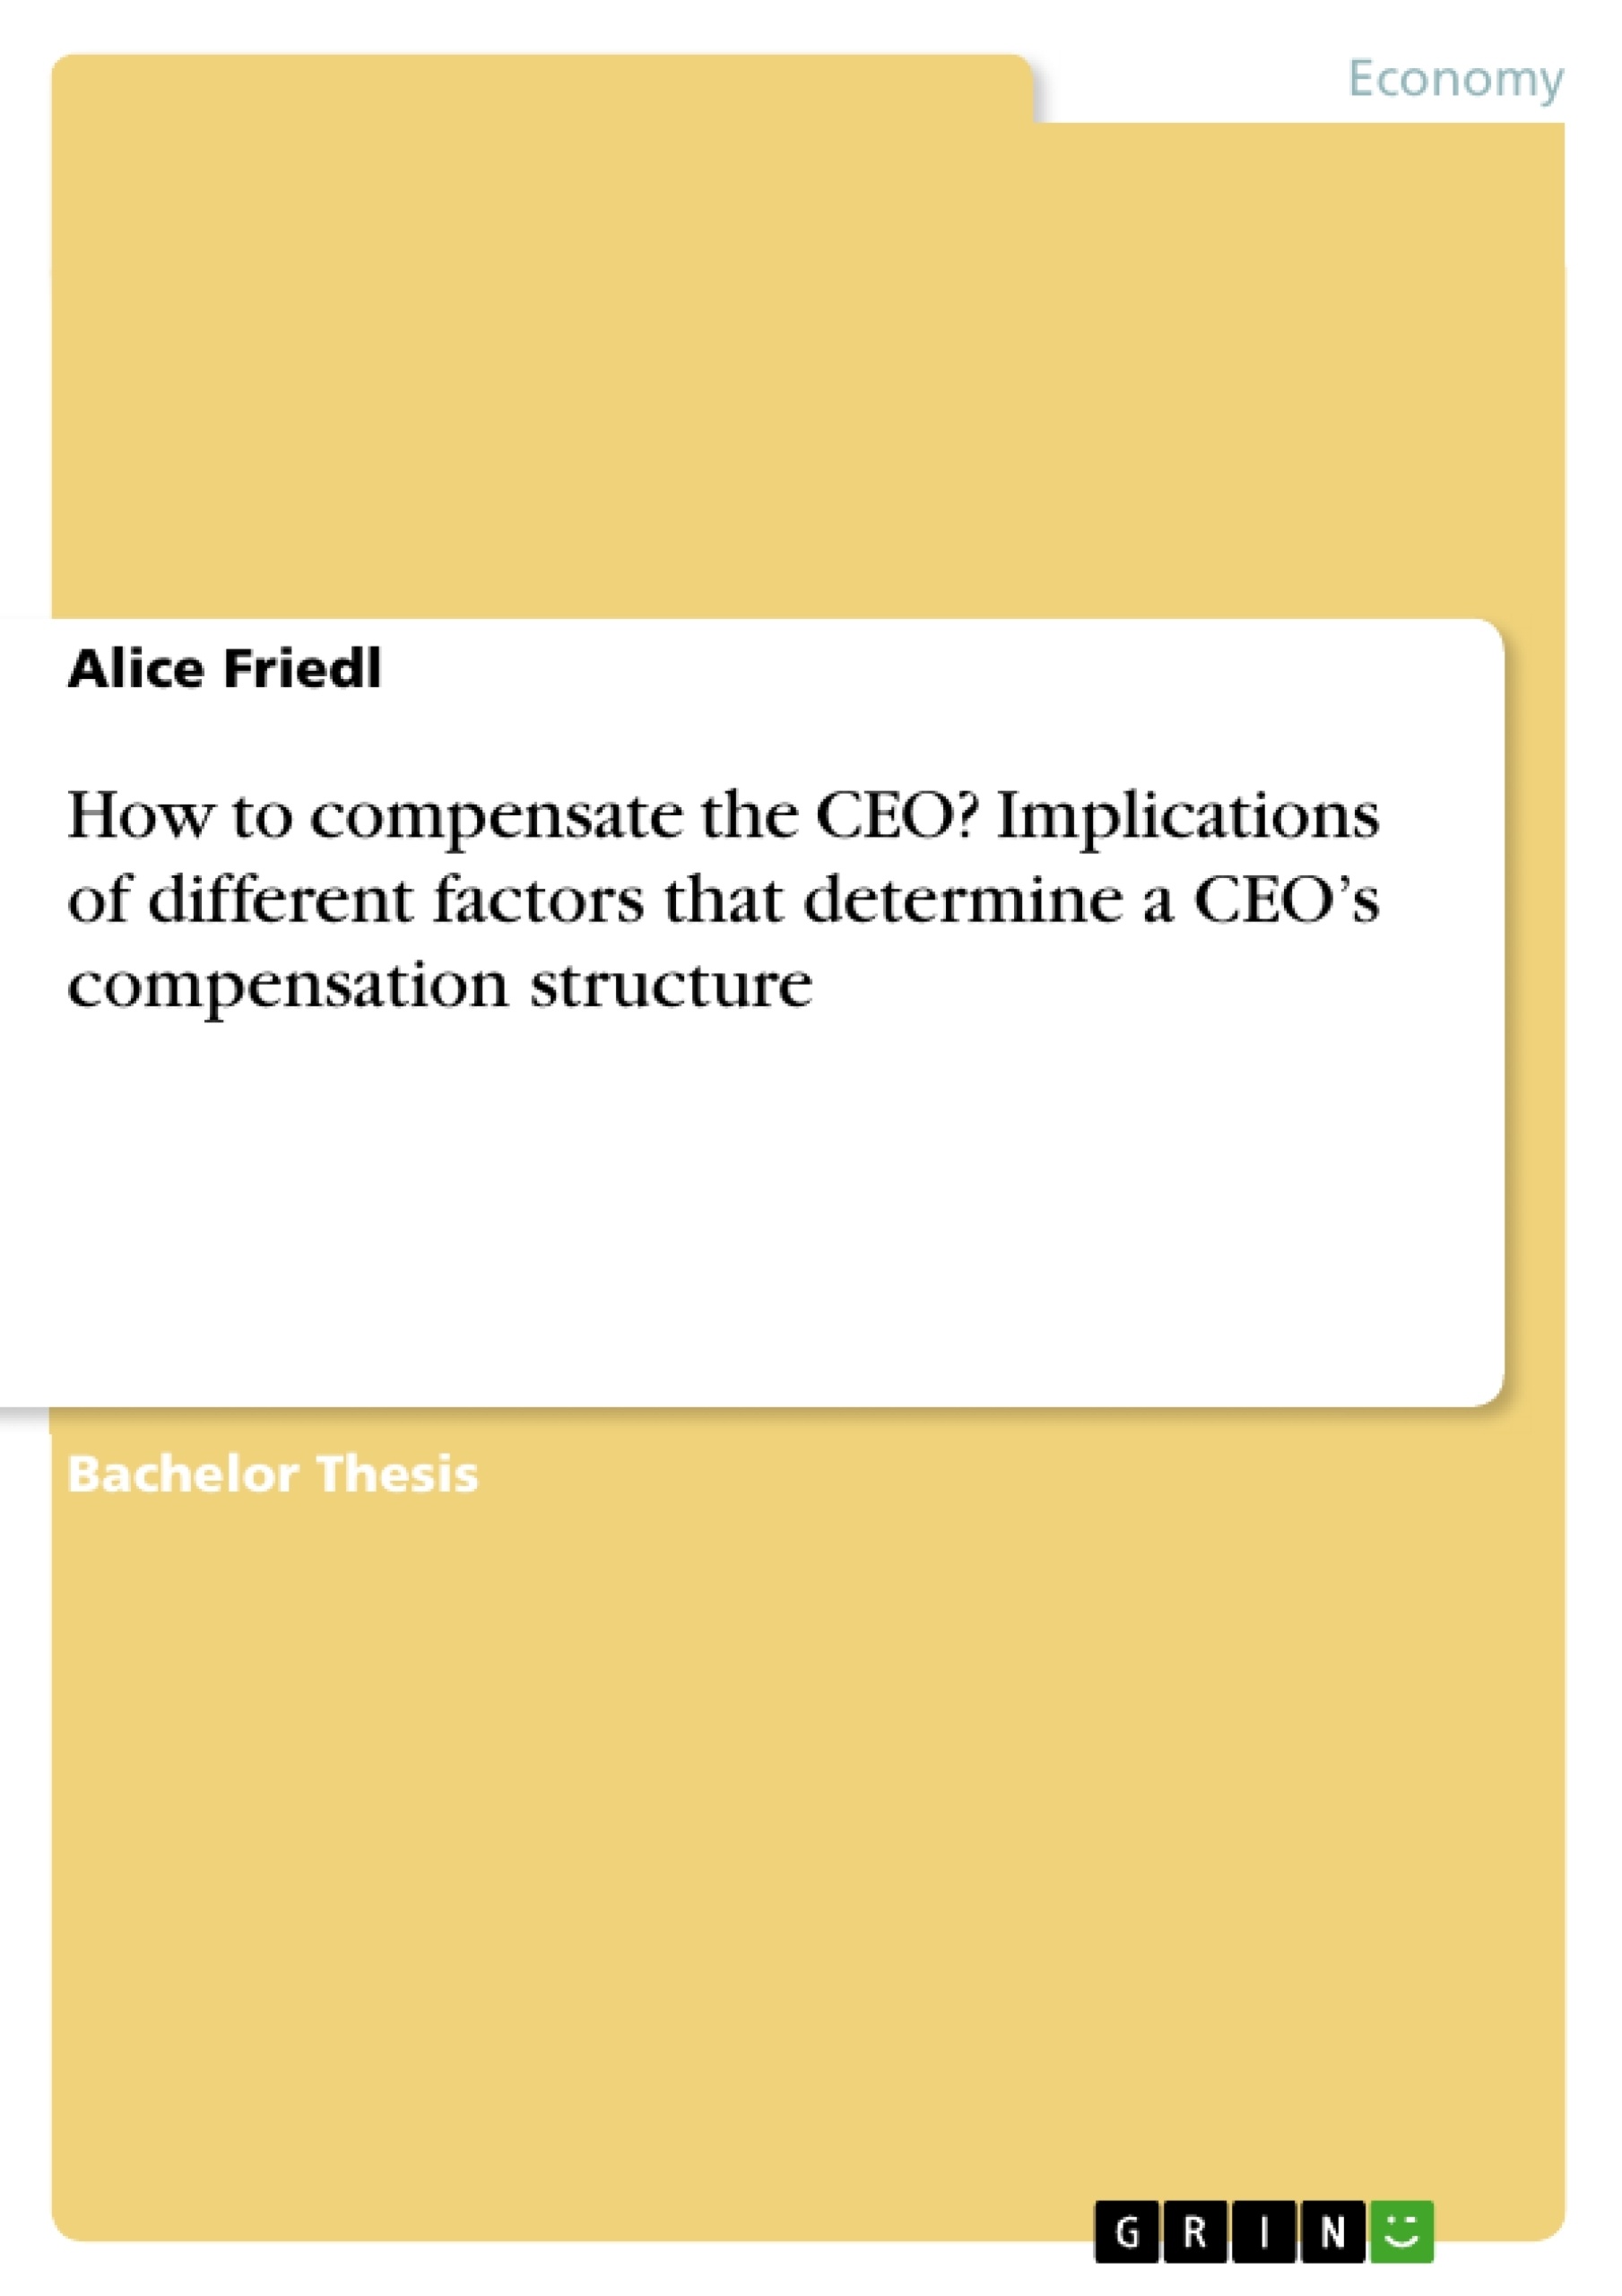 Title: How to compensate the CEO? Implications of different factors that determine a CEO’s compensation structure